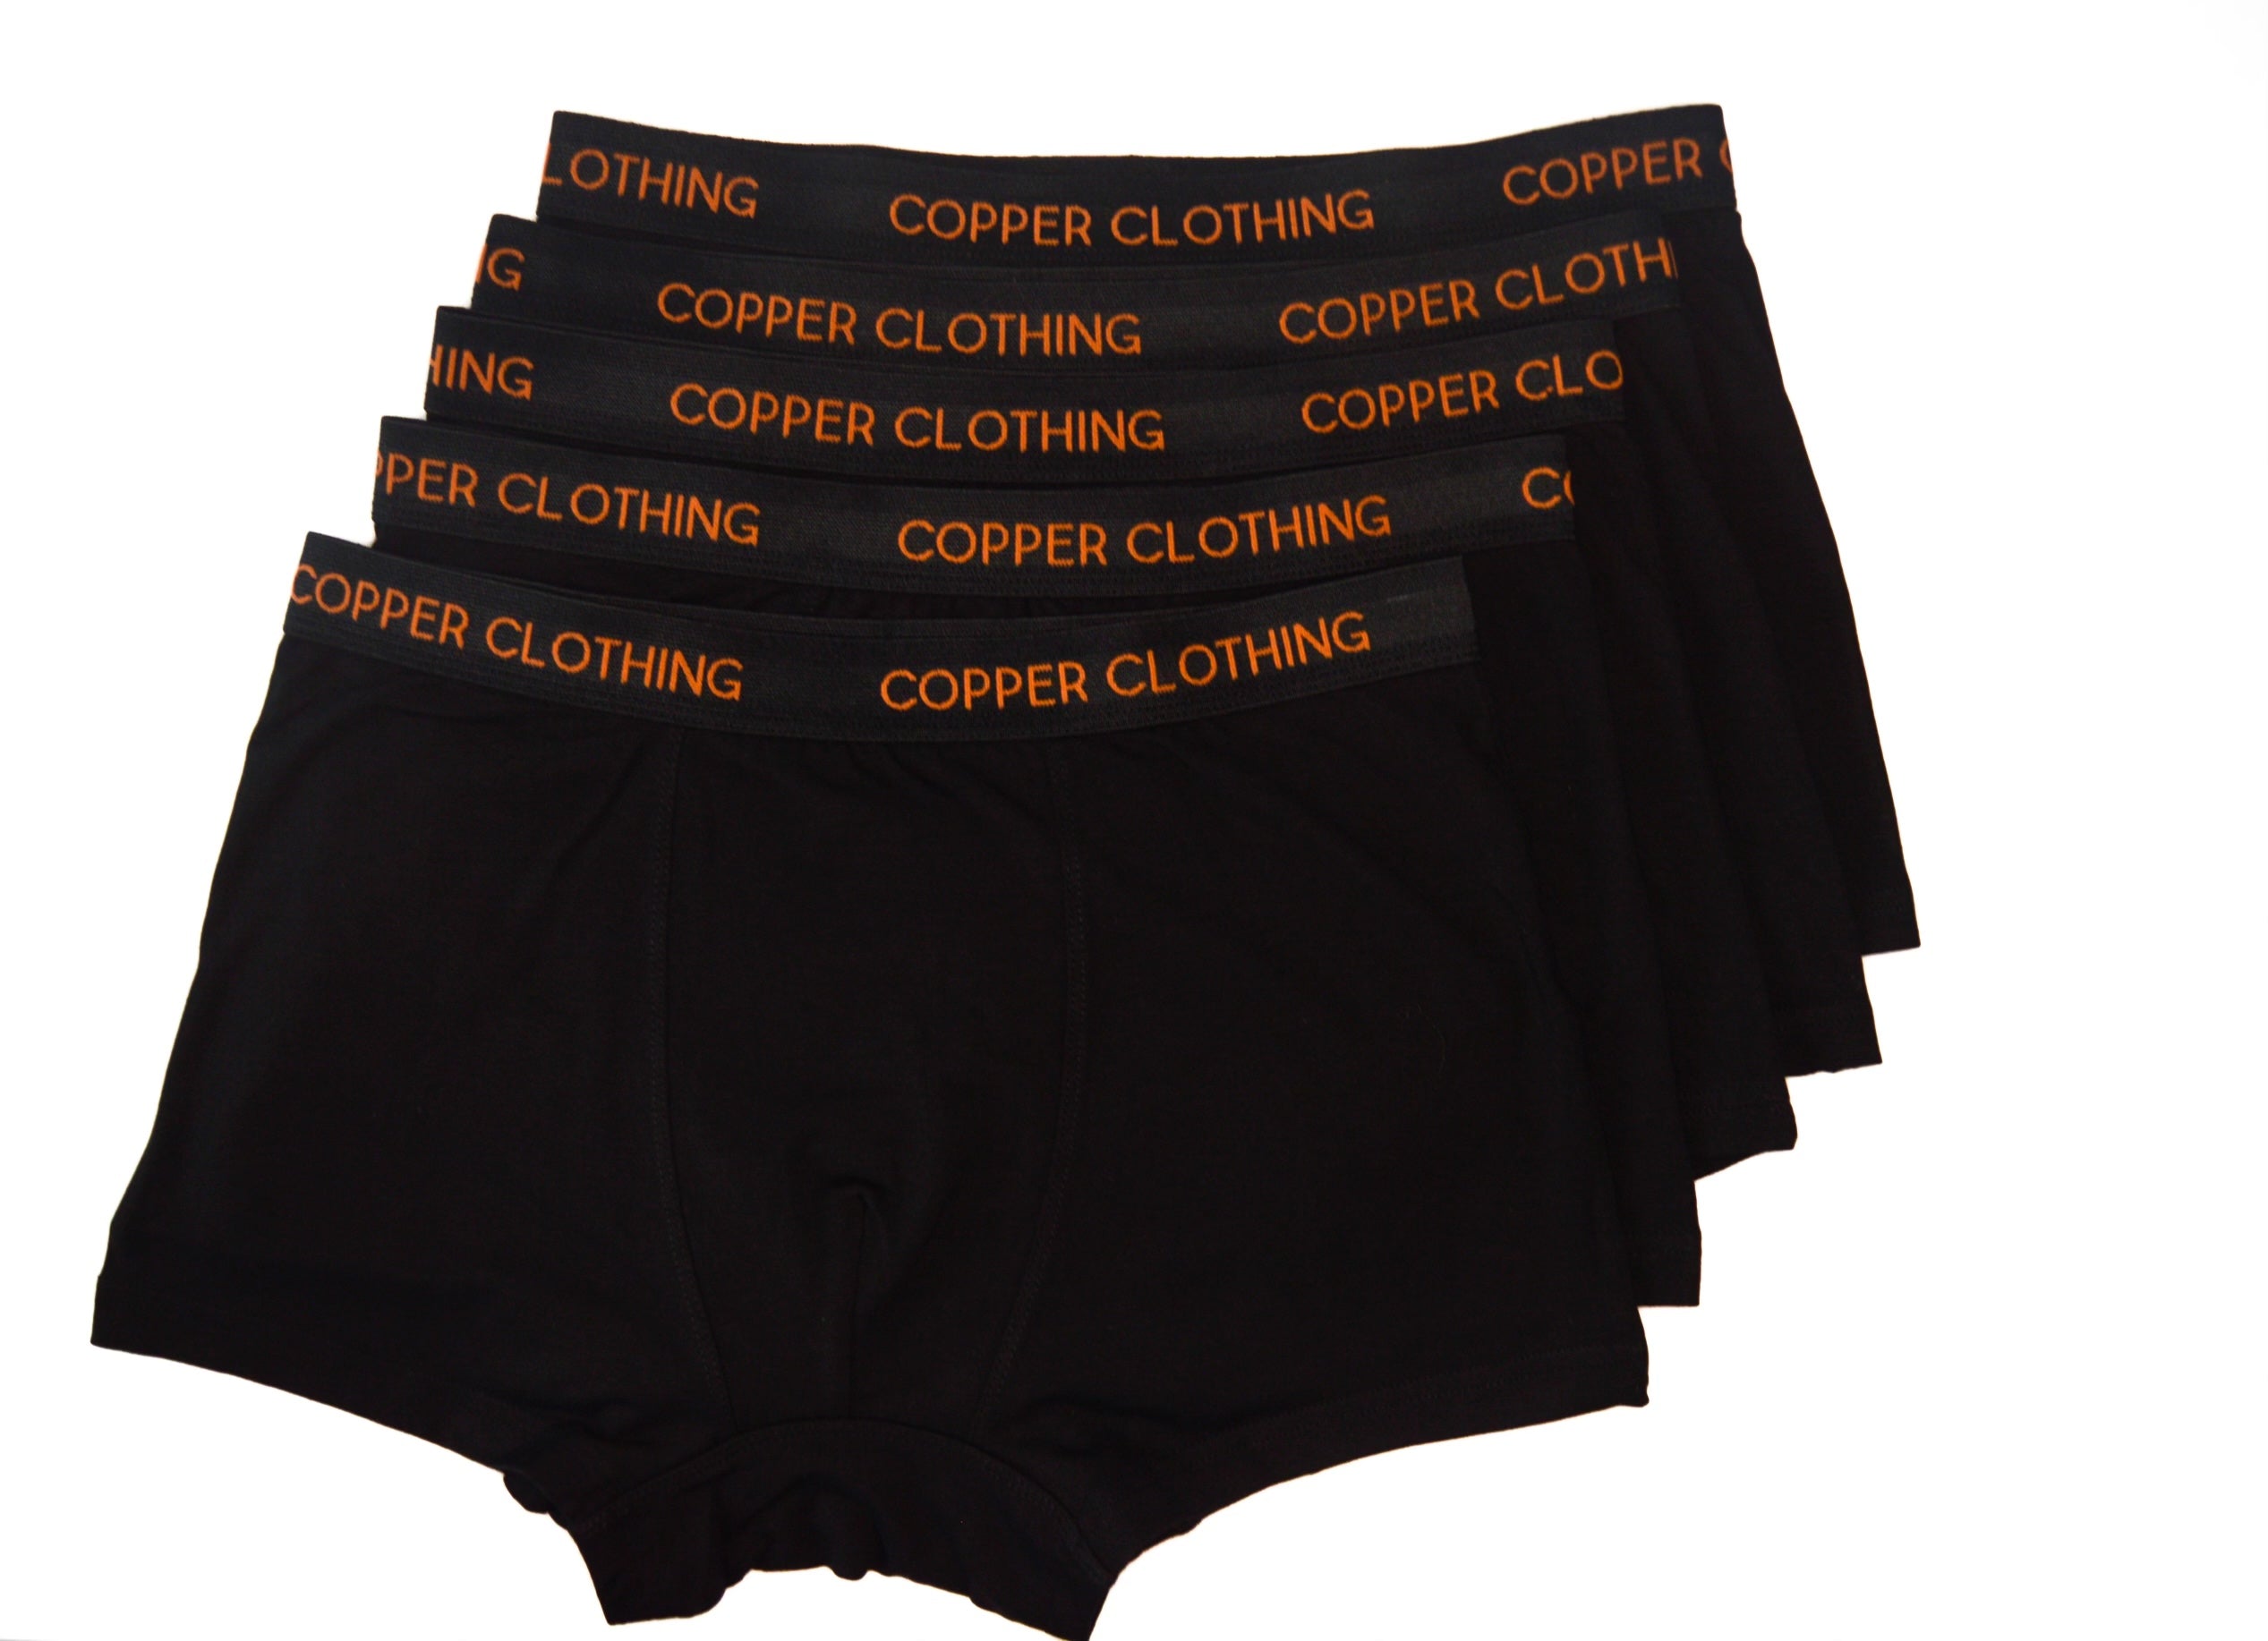  Underwear - Clothing: Clothing, Shoes & Accessories: Boxer Briefs,  Briefs, Thermal, Boxers & More